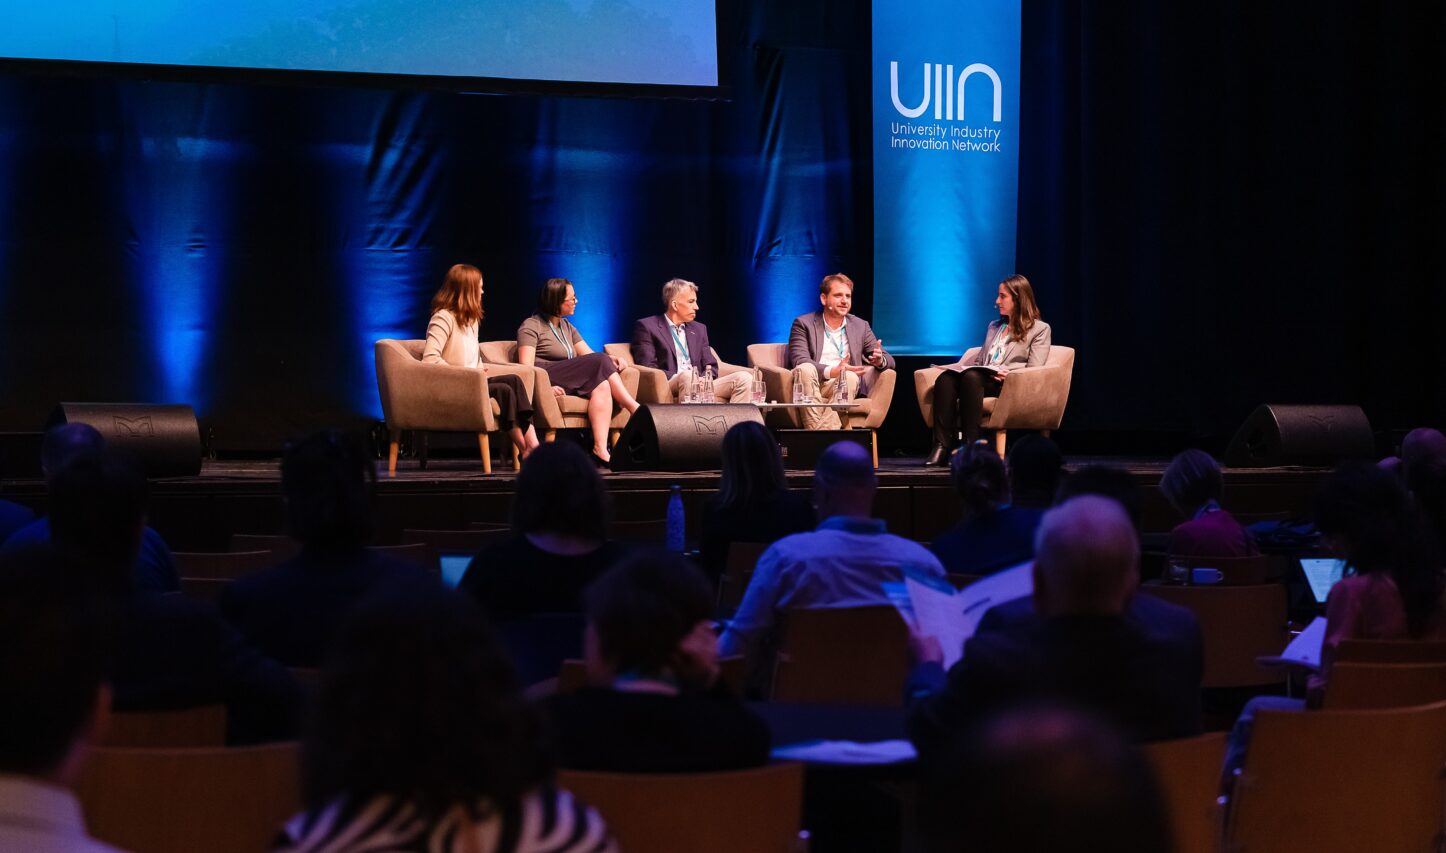 Five panel guest speakers from UIIN sitting on stage with UIIN branding in background